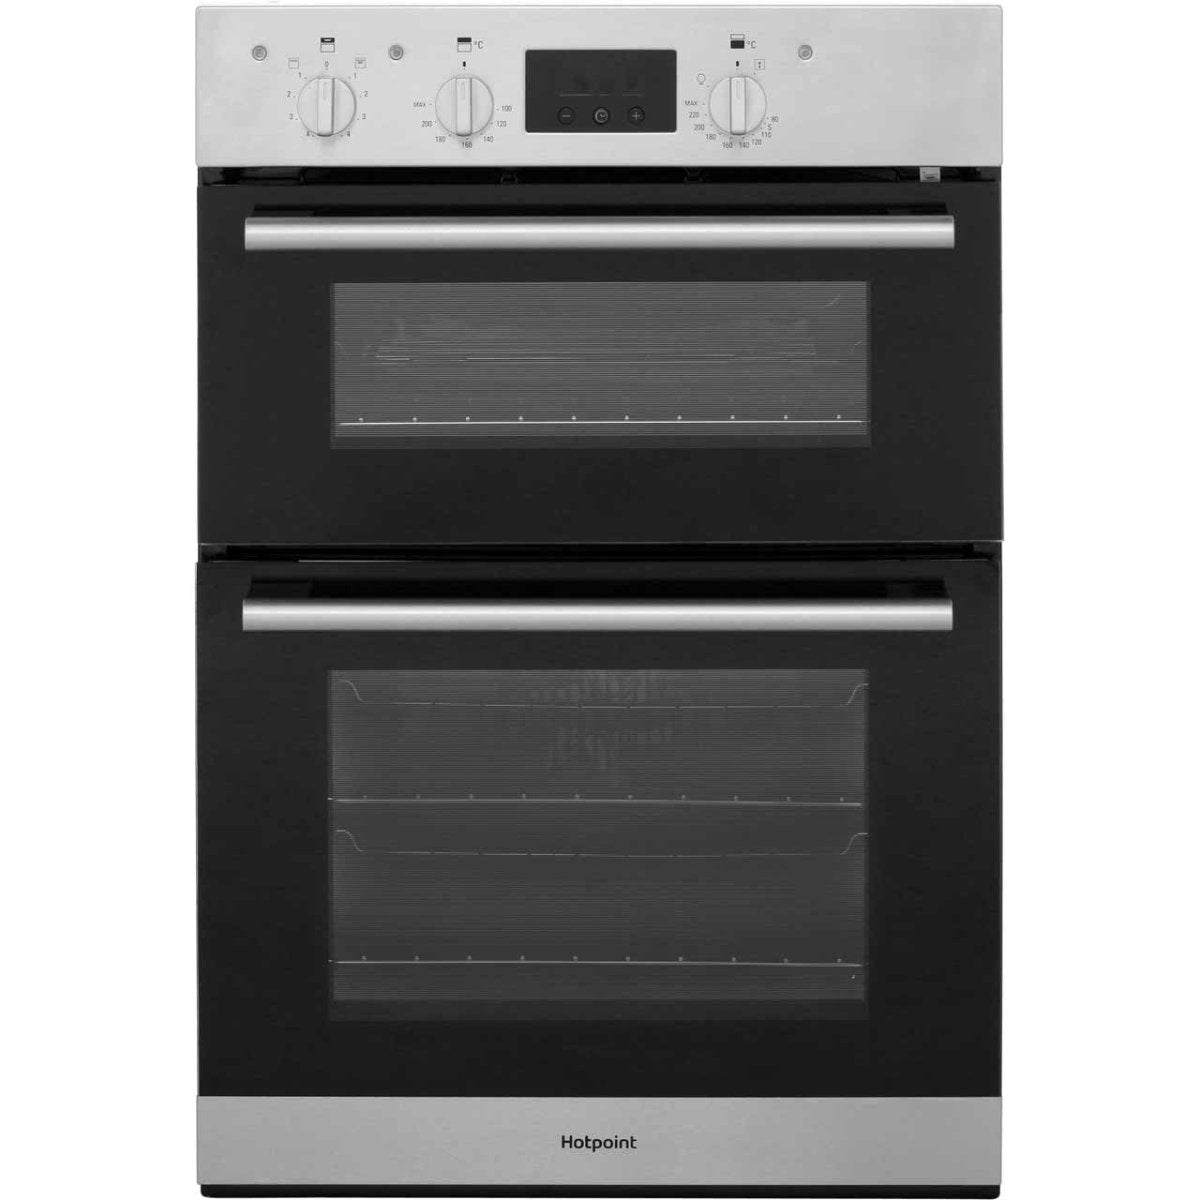 Hotpoint Class 2 DD2540IX Built In Electric Double Oven - Stainless Steel - A/A Rated | Atlantic Electrics